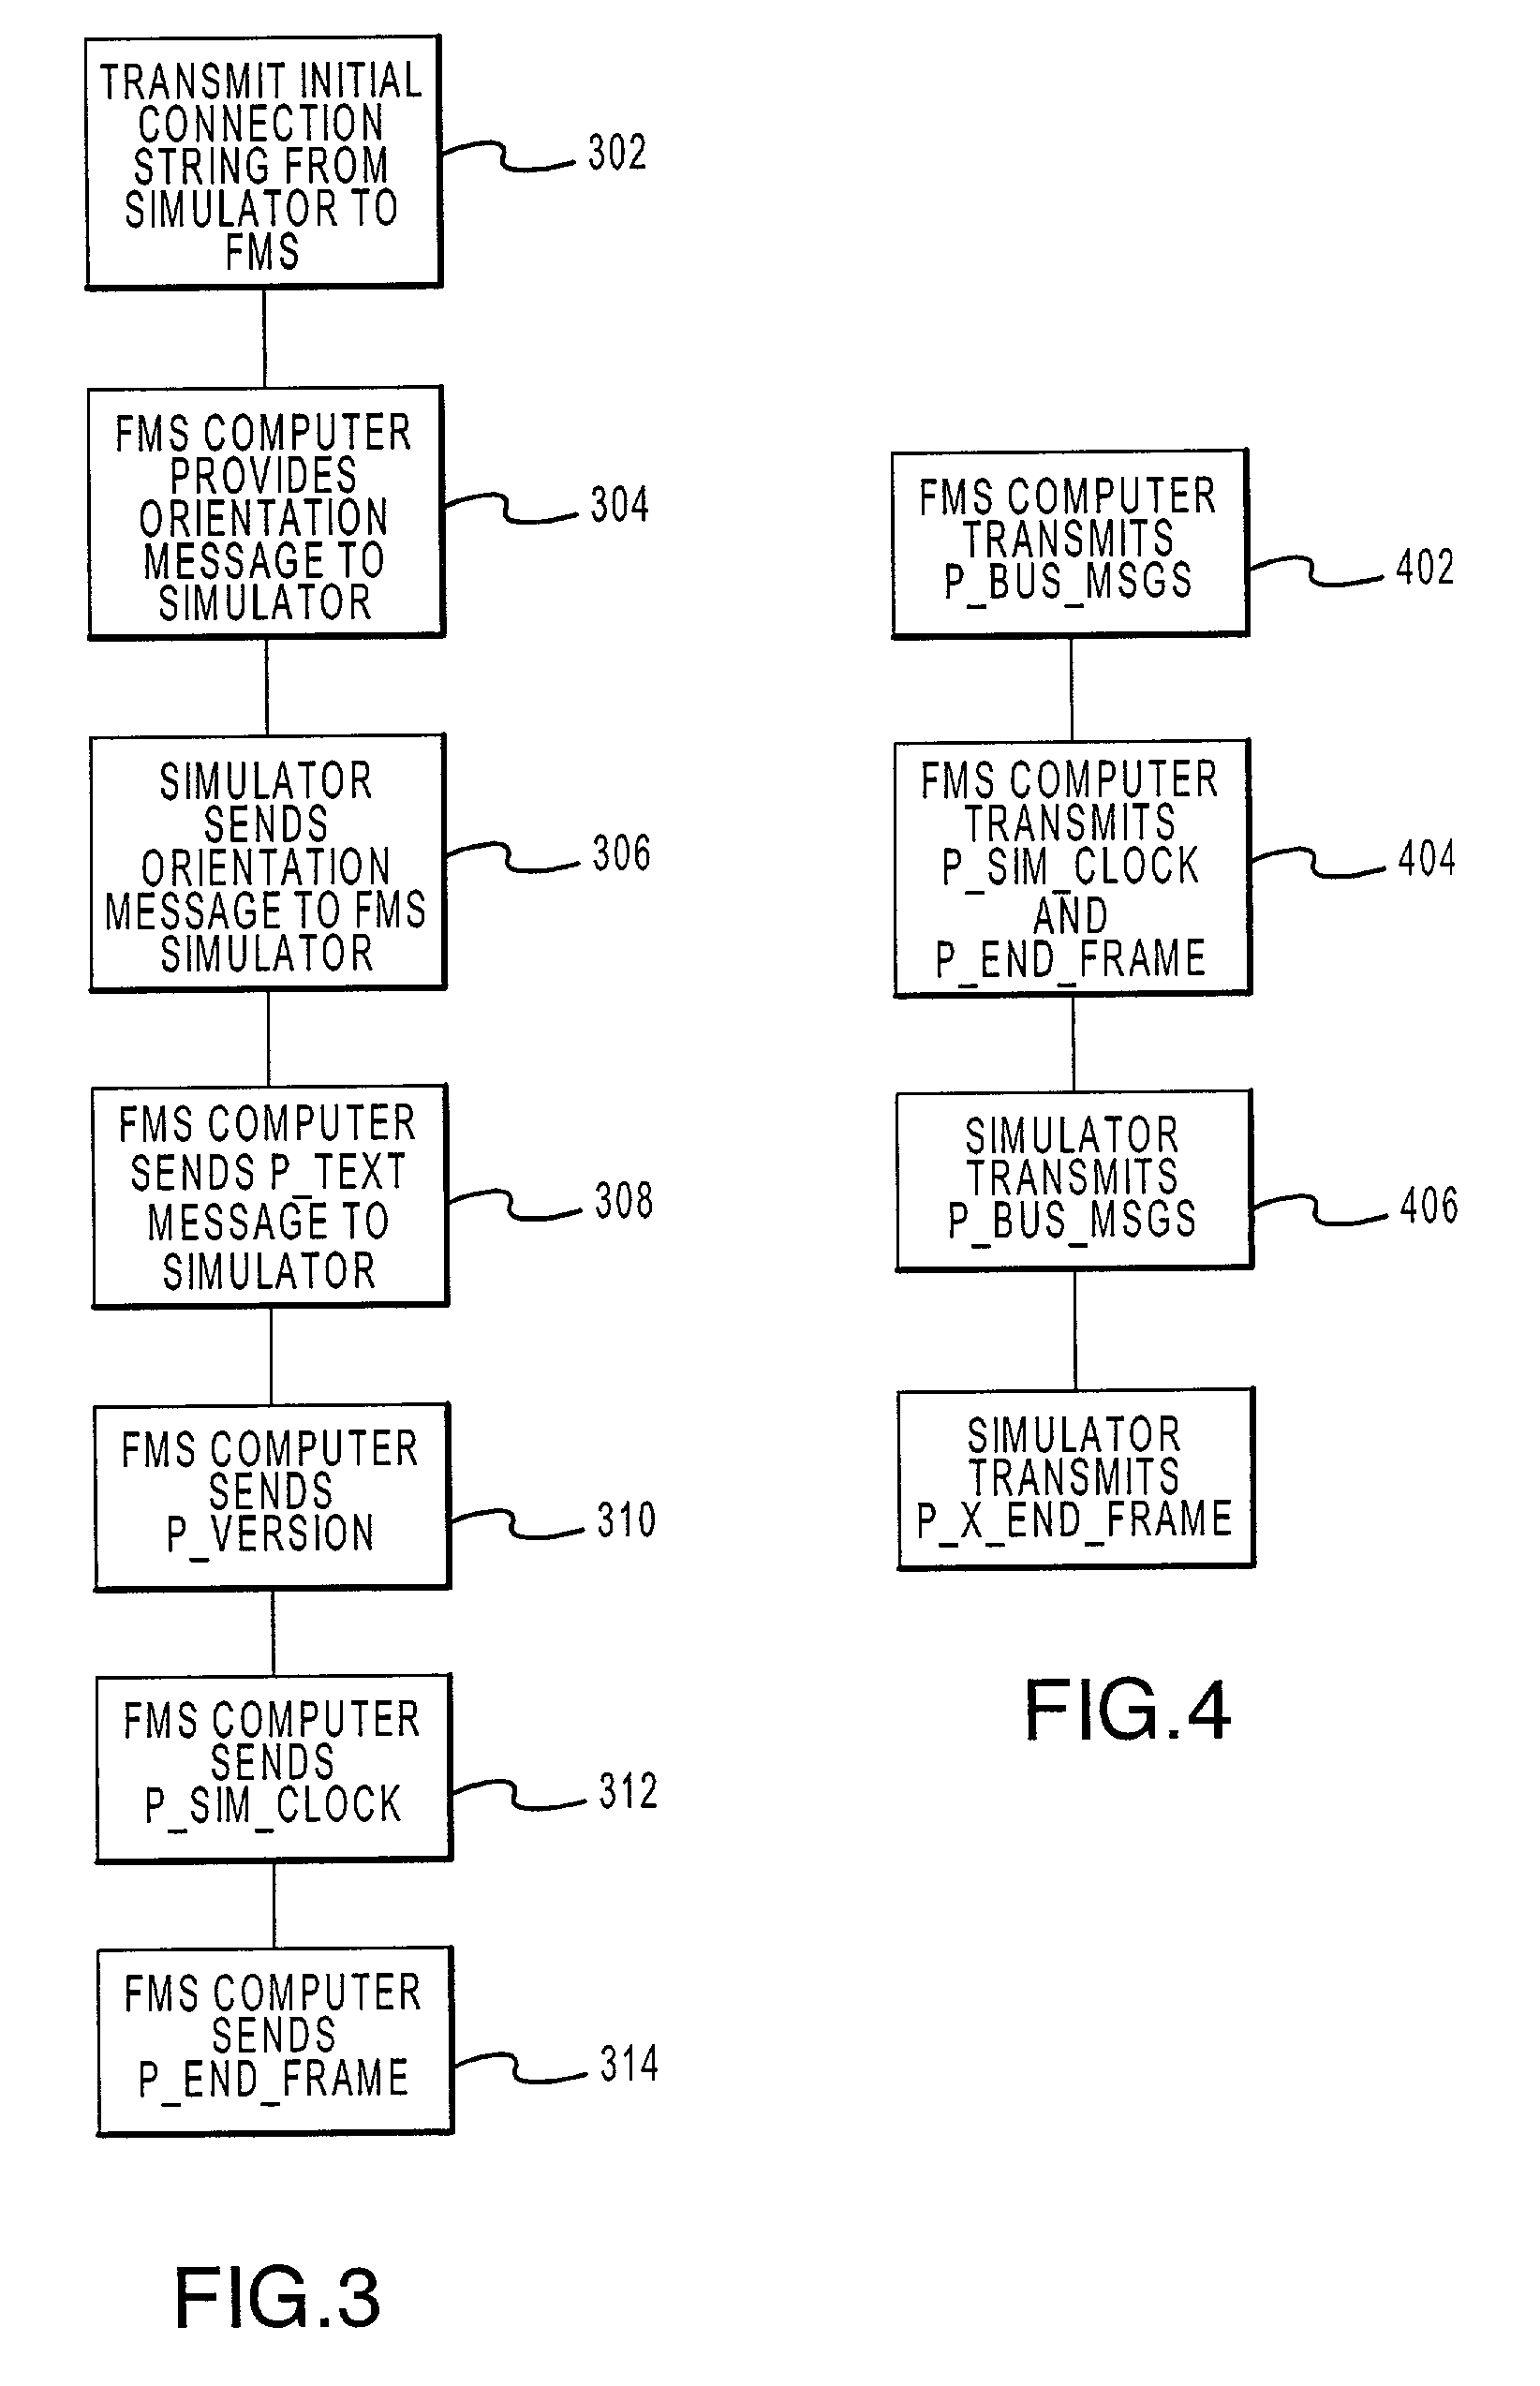 System and method for operating software in a flight simulator environment